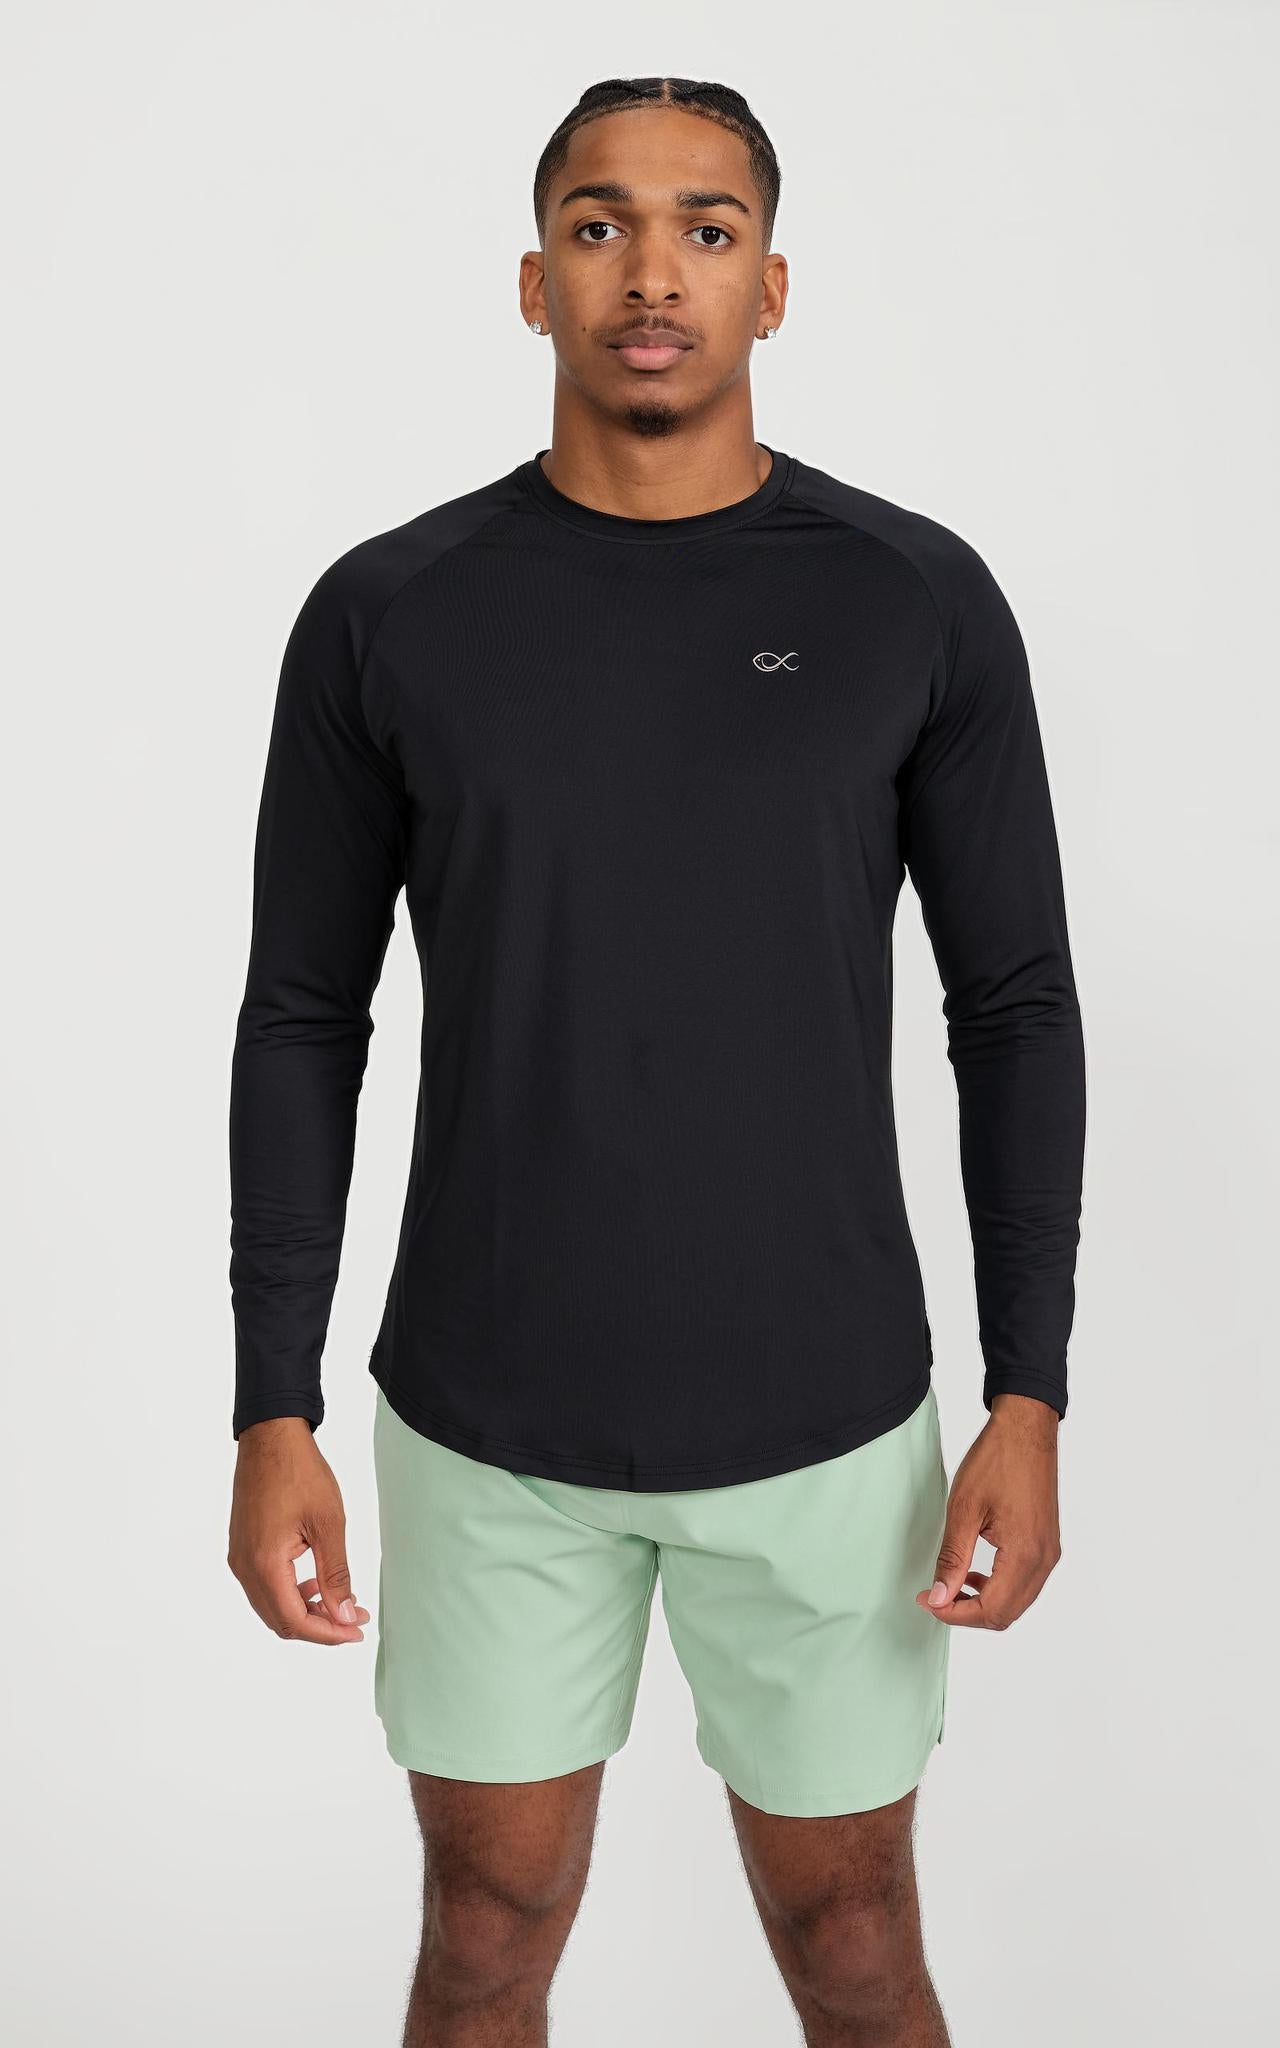 Long Sleeve Performance Cooling Shirt UPF 50 in Black S